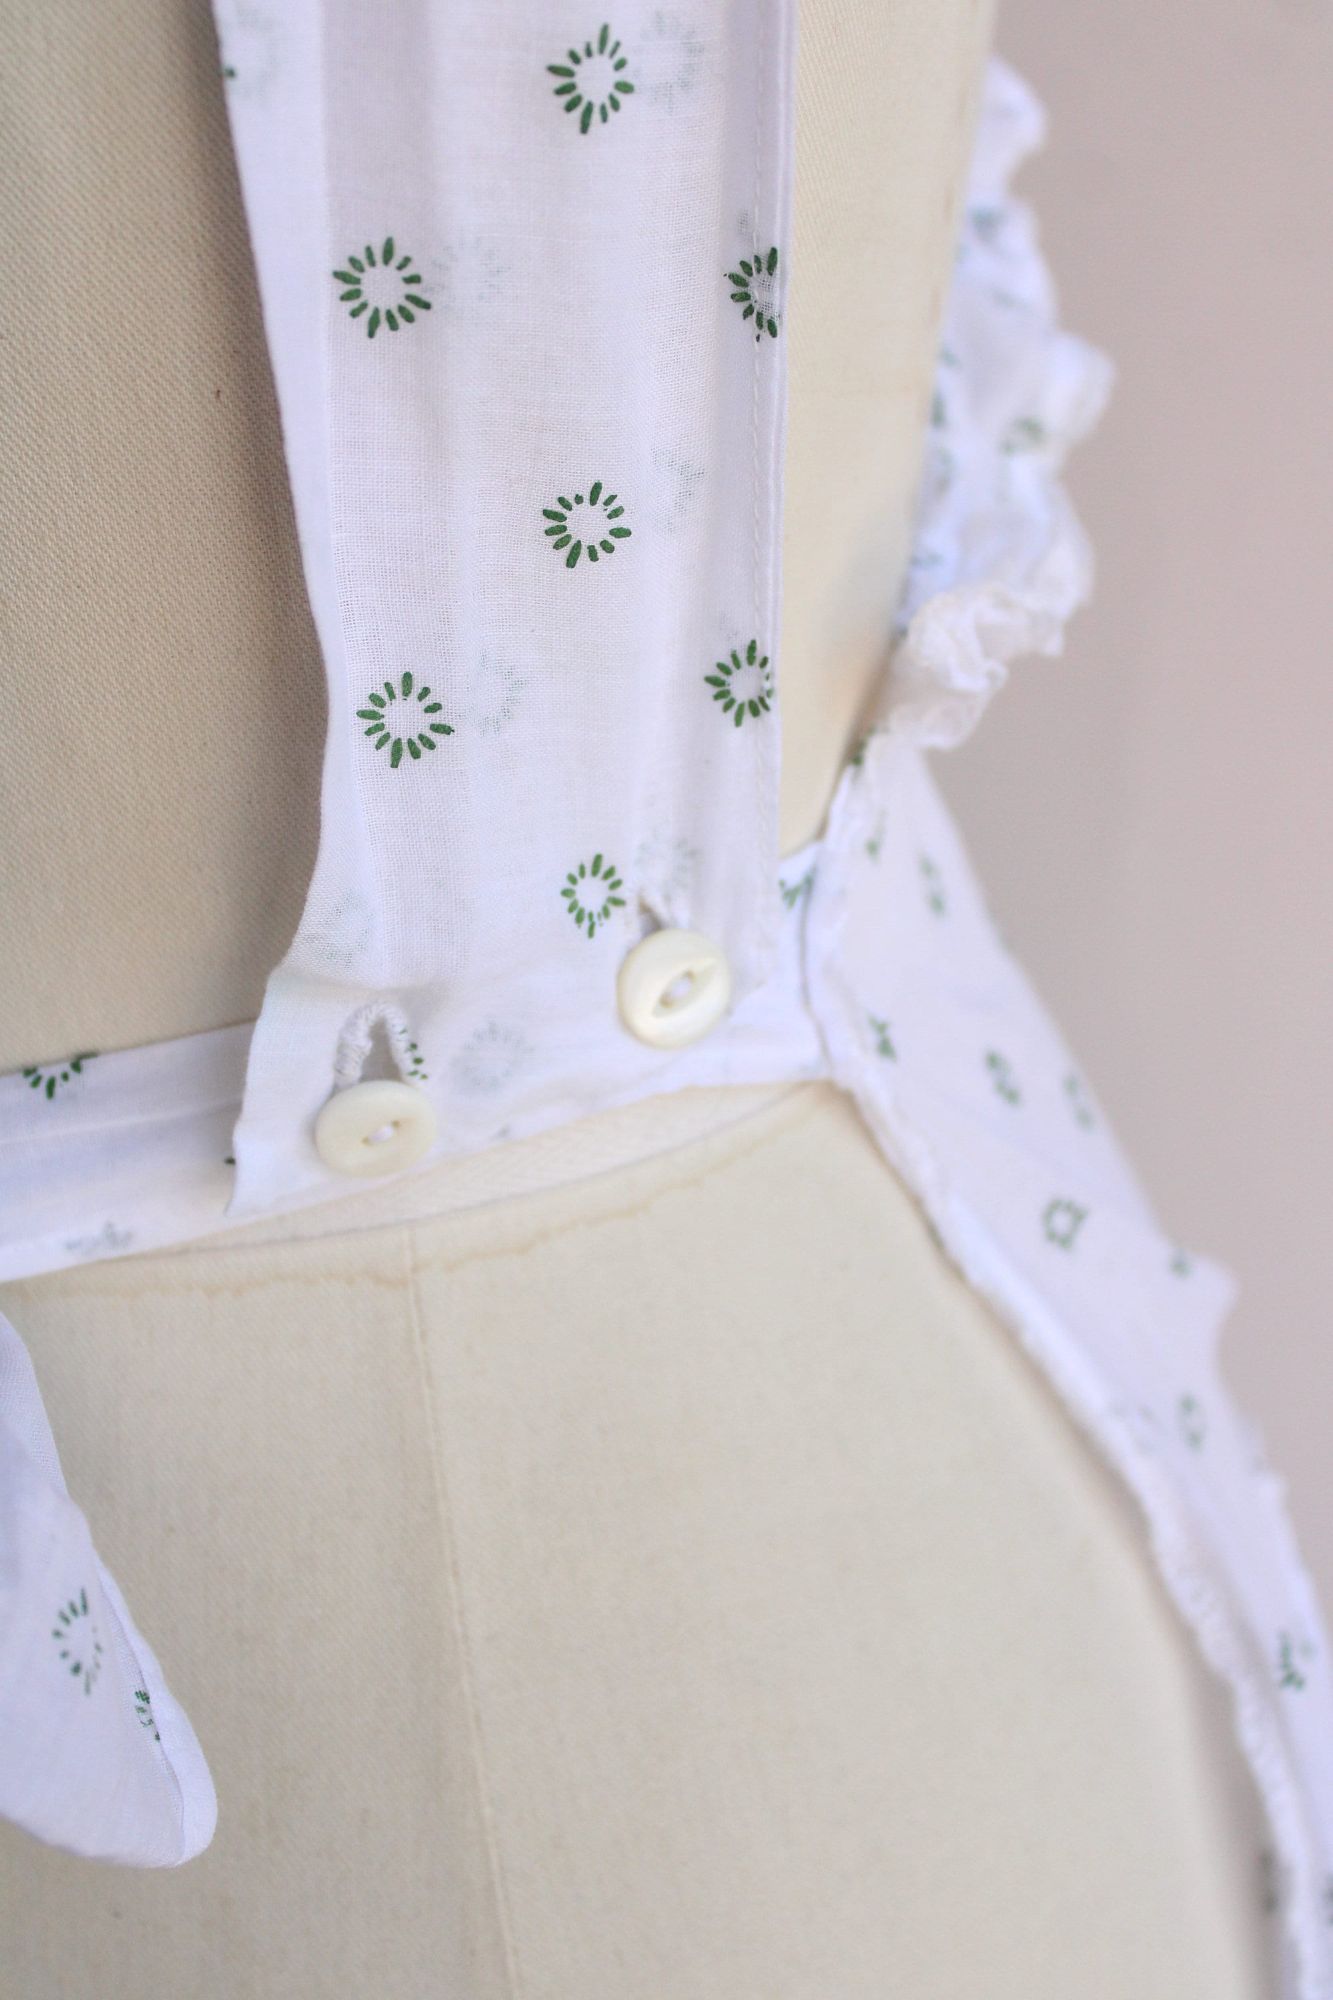 Vintage 1940s Green and White Print Pinafore Apron